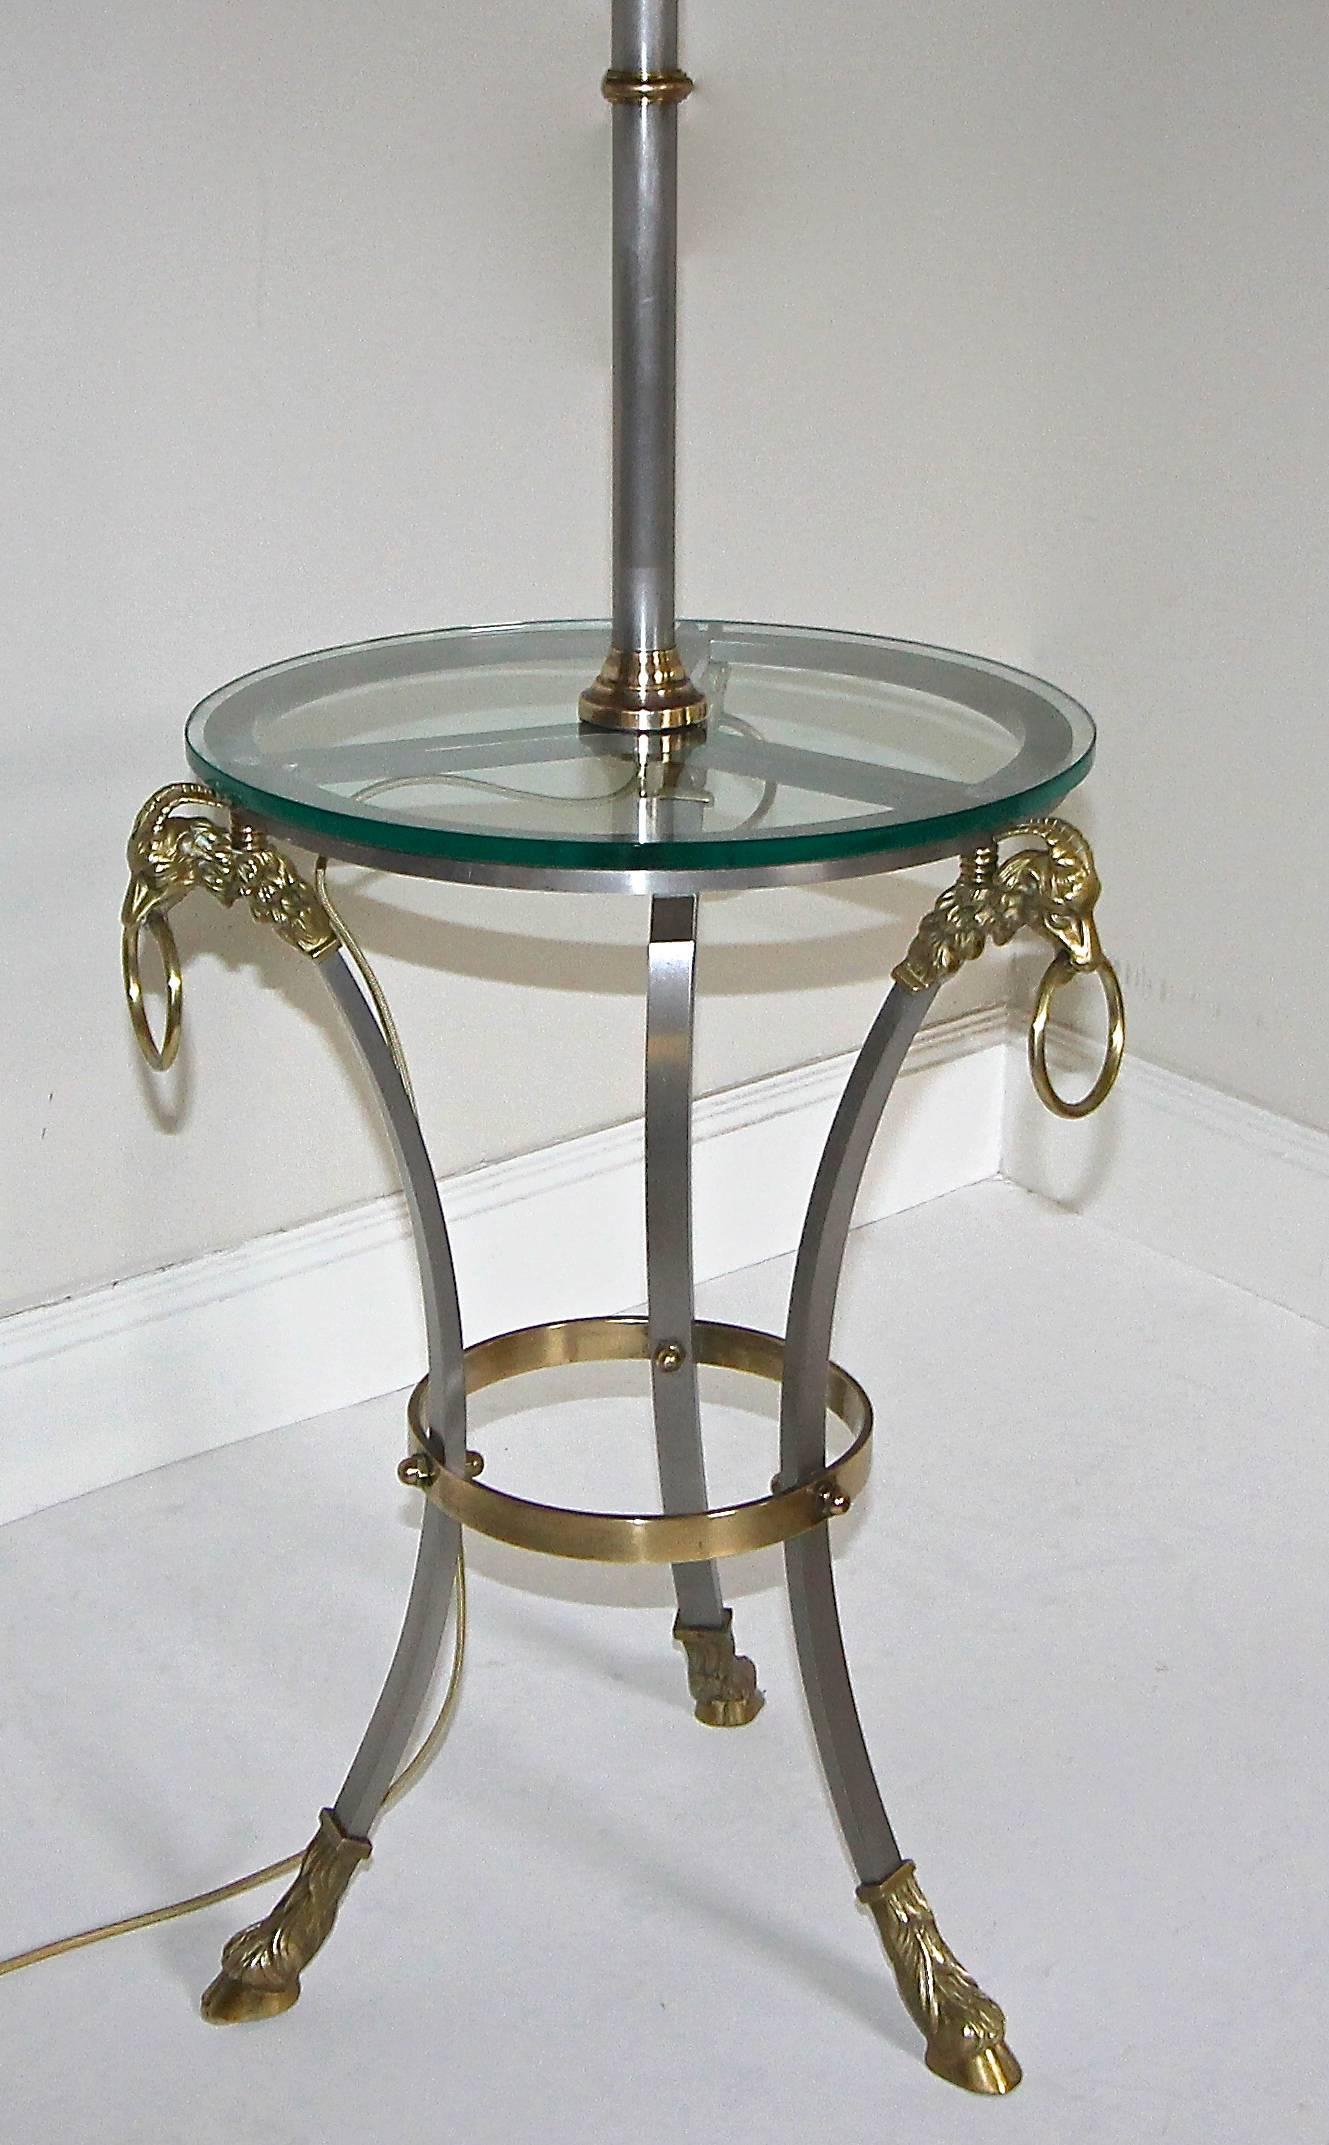 Mid-20th Century French Masion Jansen Style Brushed Steel and Brass Lamp Side Table For Sale